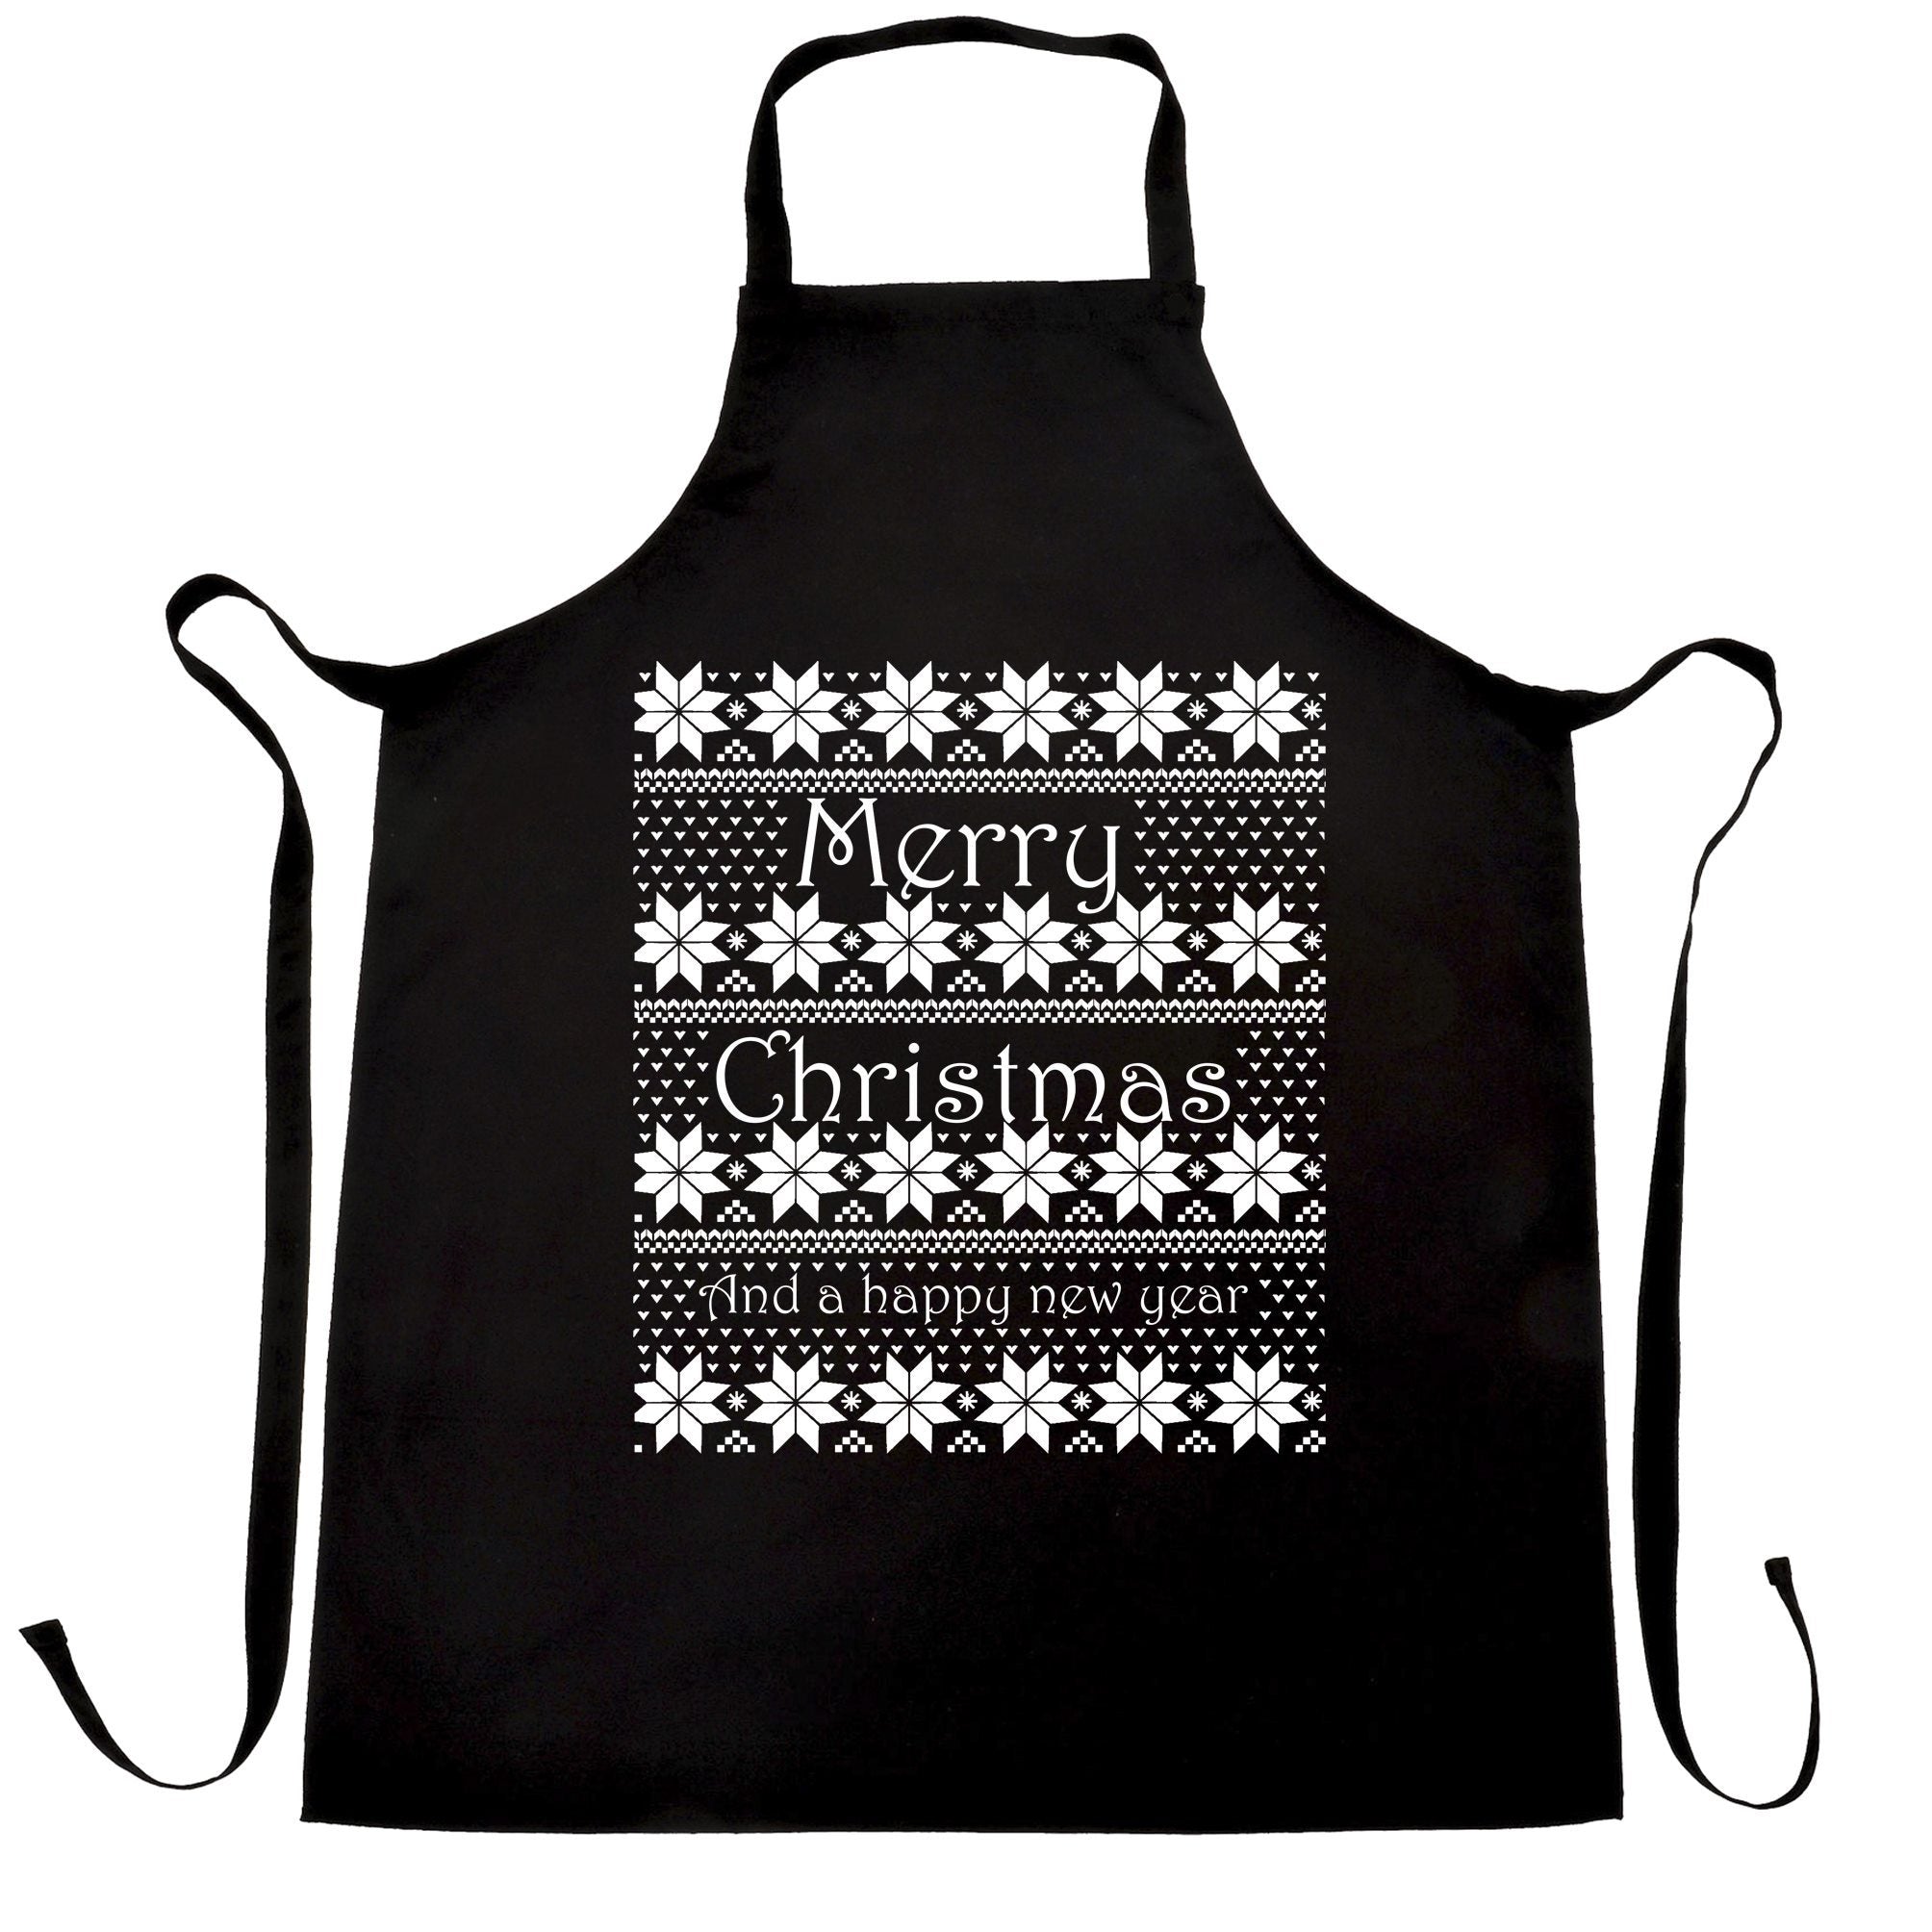 Merry Christmas Chef’s Apron Xmas Ugly Sweater Pattern